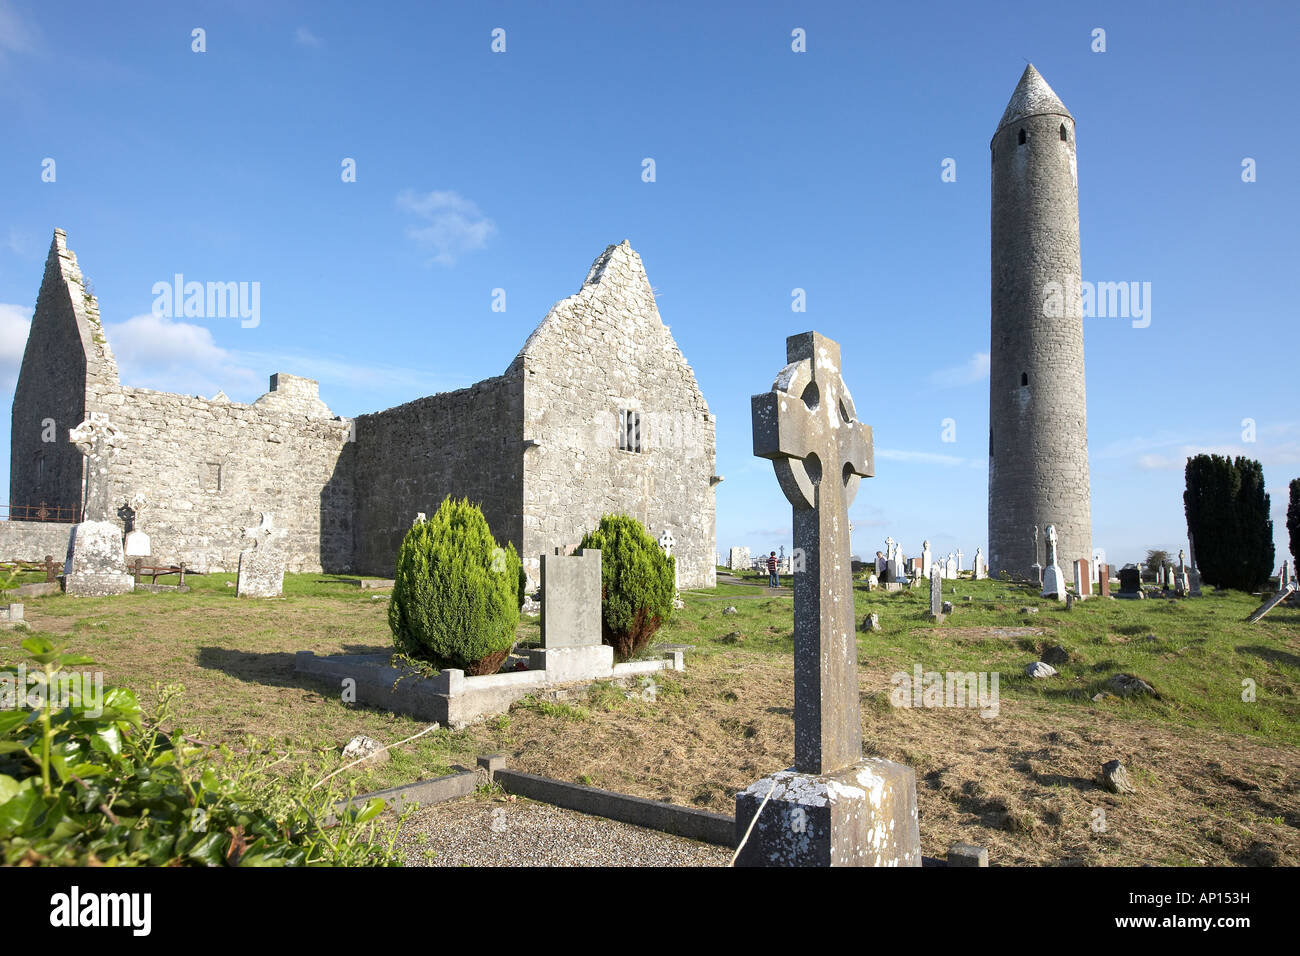 Kilmacduagh monastic settlement and round tower county clare Republic of Ireland Stock Photo